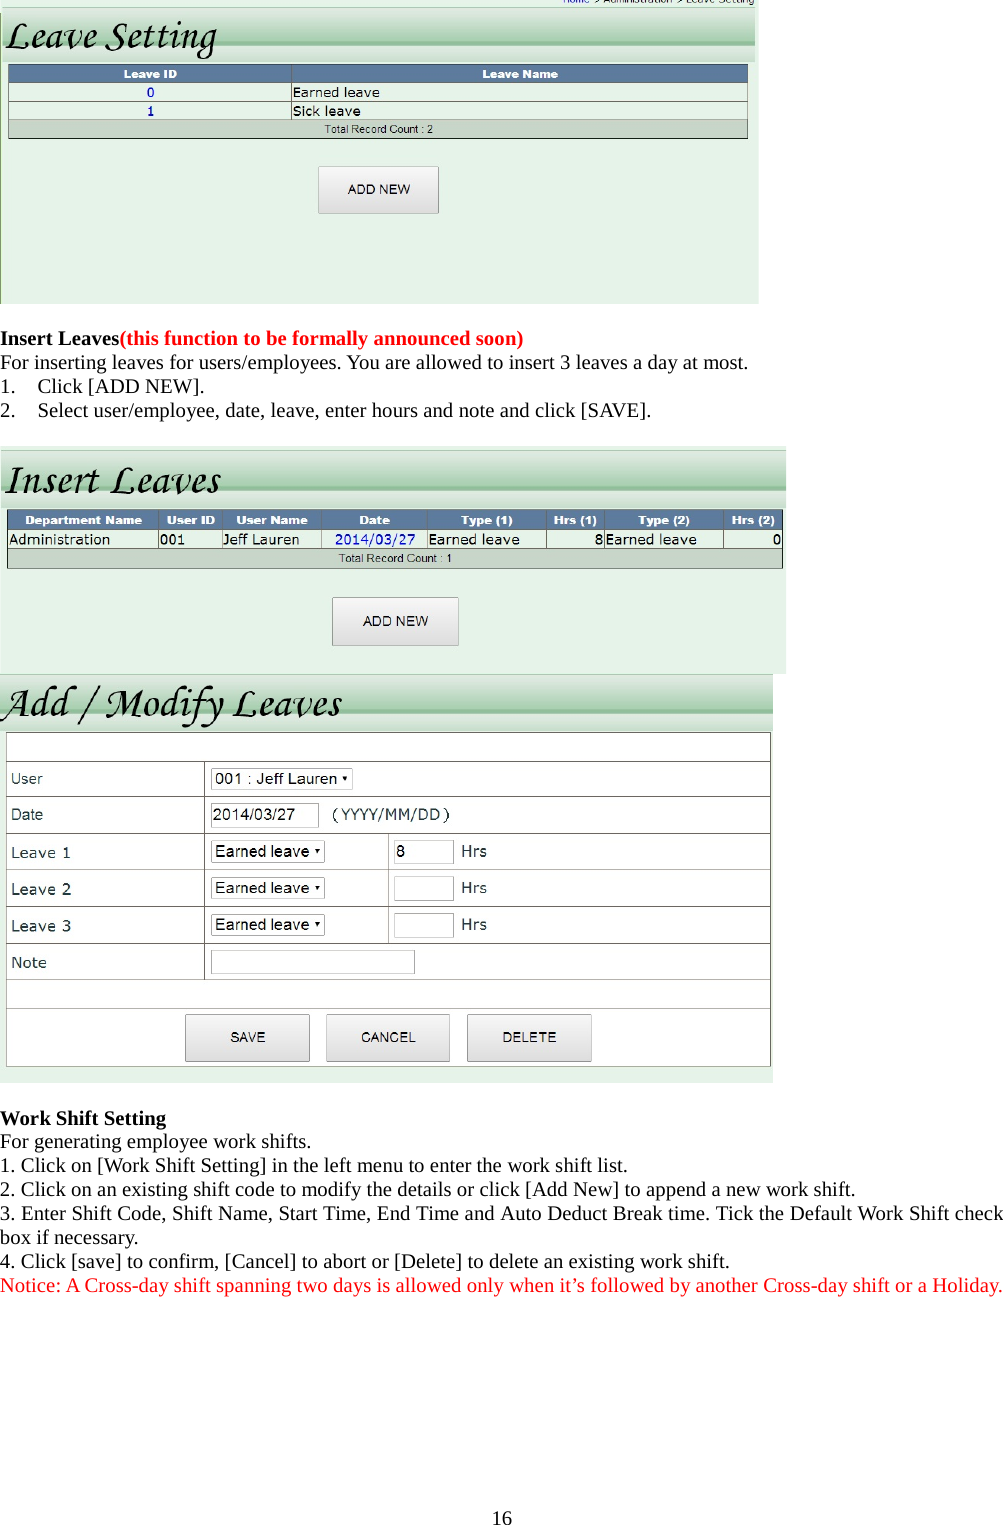  16   Insert Leaves(this function to be formally announced soon) For inserting leaves for users/employees. You are allowed to insert 3 leaves a day at most. 1. Click [ADD NEW]. 2. Select user/employee, date, leave, enter hours and note and click [SAVE].     Work Shift Setting For generating employee work shifts. 1. Click on [Work Shift Setting] in the left menu to enter the work shift list. 2. Click on an existing shift code to modify the details or click [Add New] to append a new work shift. 3. Enter Shift Code, Shift Name, Start Time, End Time and Auto Deduct Break time. Tick the Default Work Shift check box if necessary. 4. Click [save] to confirm, [Cancel] to abort or [Delete] to delete an existing work shift. Notice: A Cross-day shift spanning two days is allowed only when it’s followed by another Cross-day shift or a Holiday. 